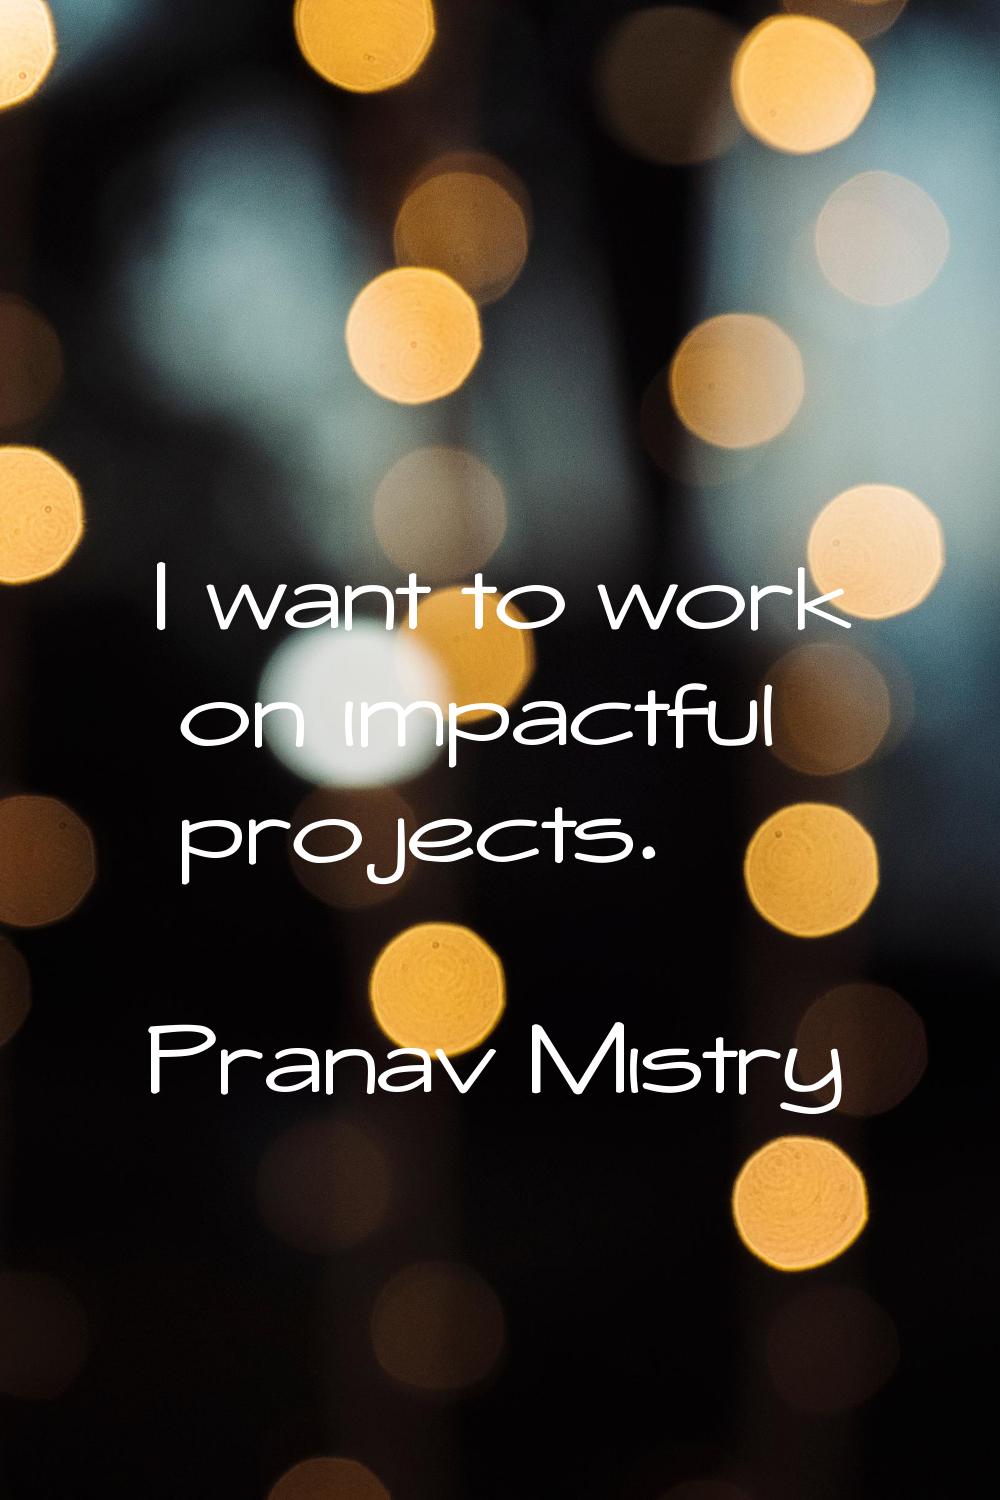 I want to work on impactful projects.